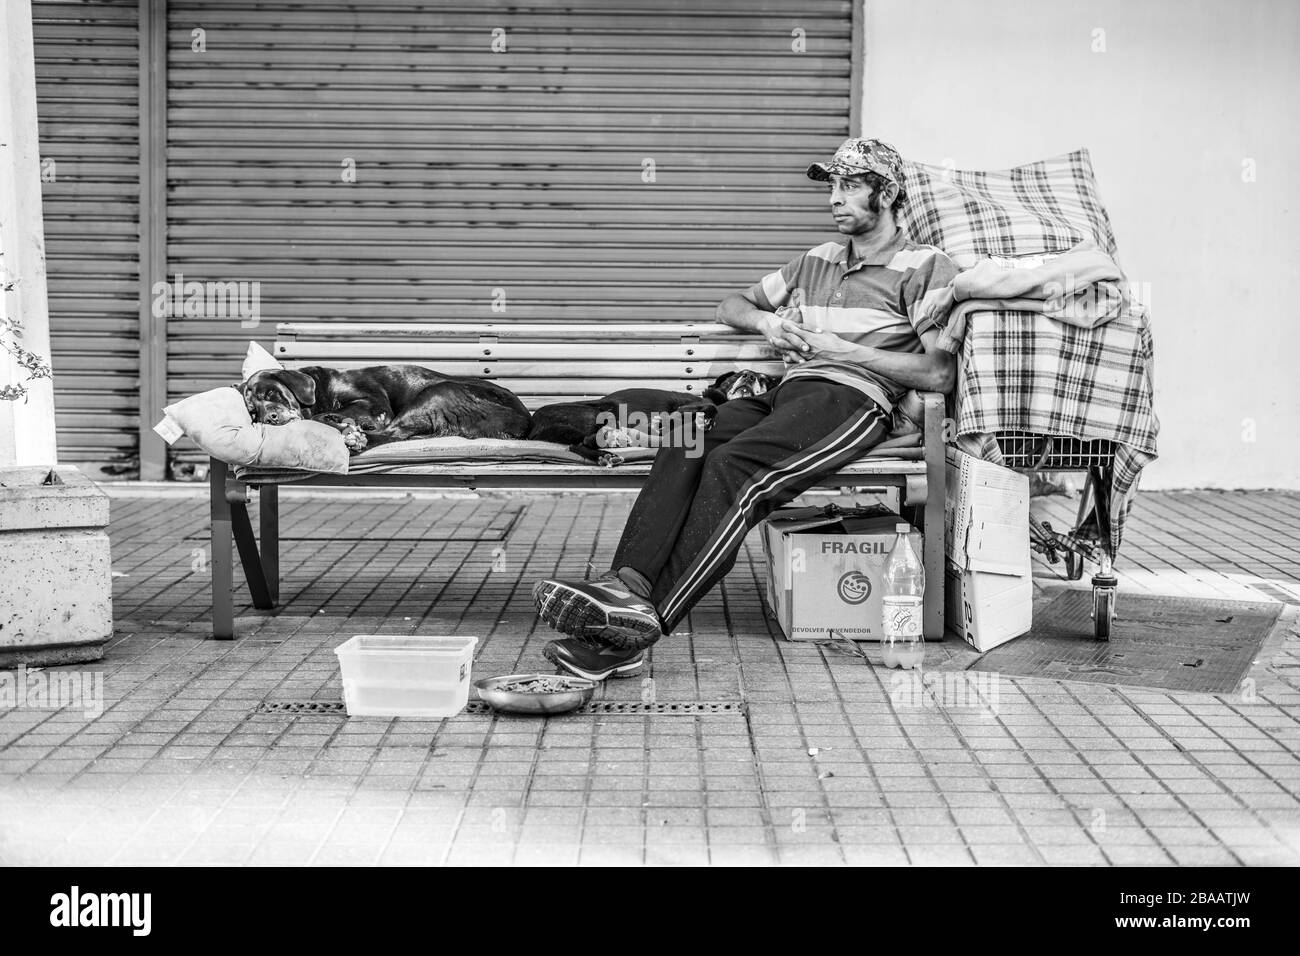 Santiago Chile 26th March 2020 Real homeless people worried and abandoned at Providencia streets during the last hours before the Coronavirus lockdown Stock Photo